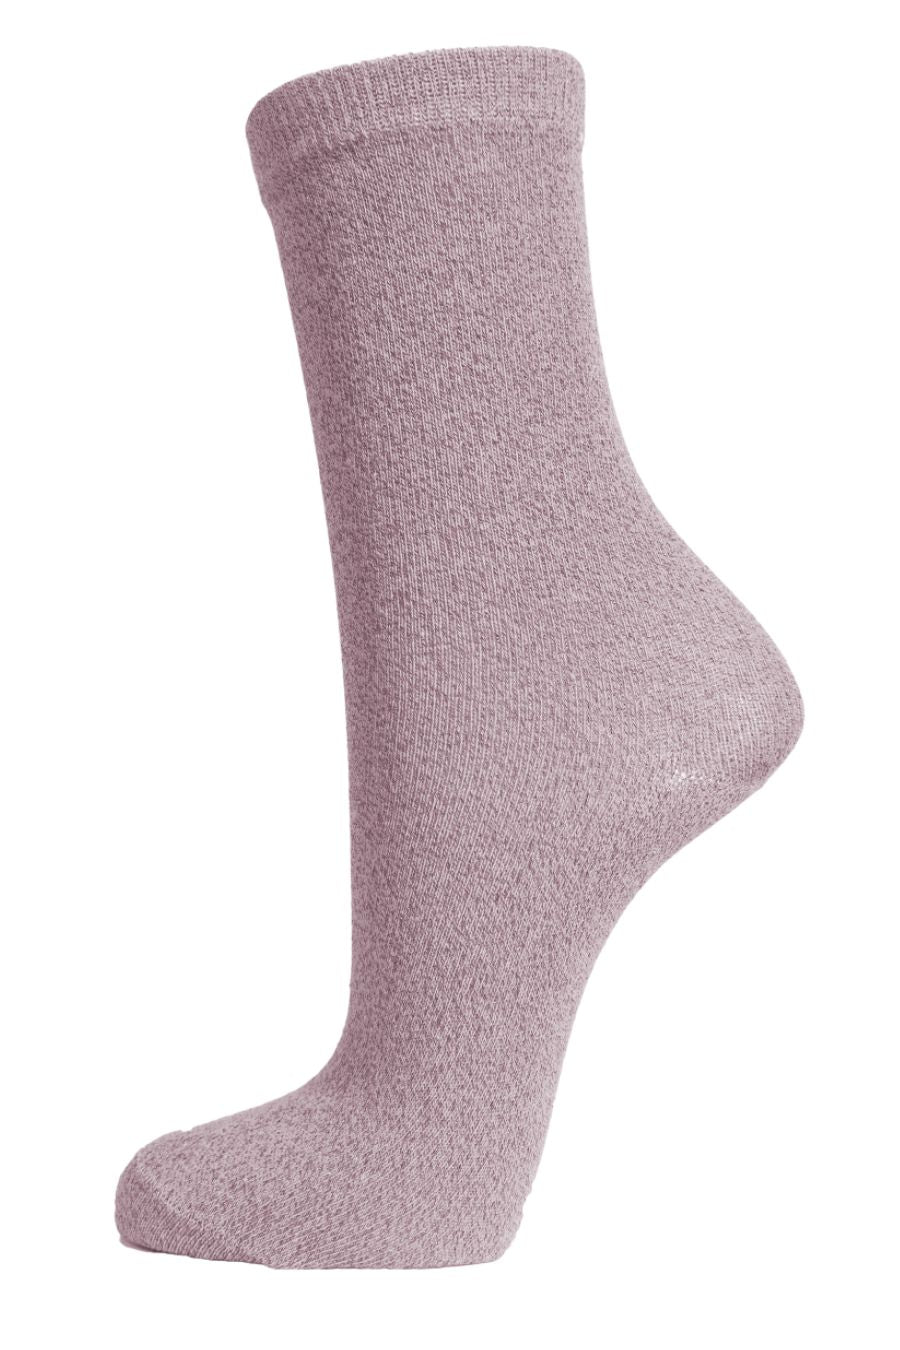 pink ankle socks with all an over pink glitter sparkle